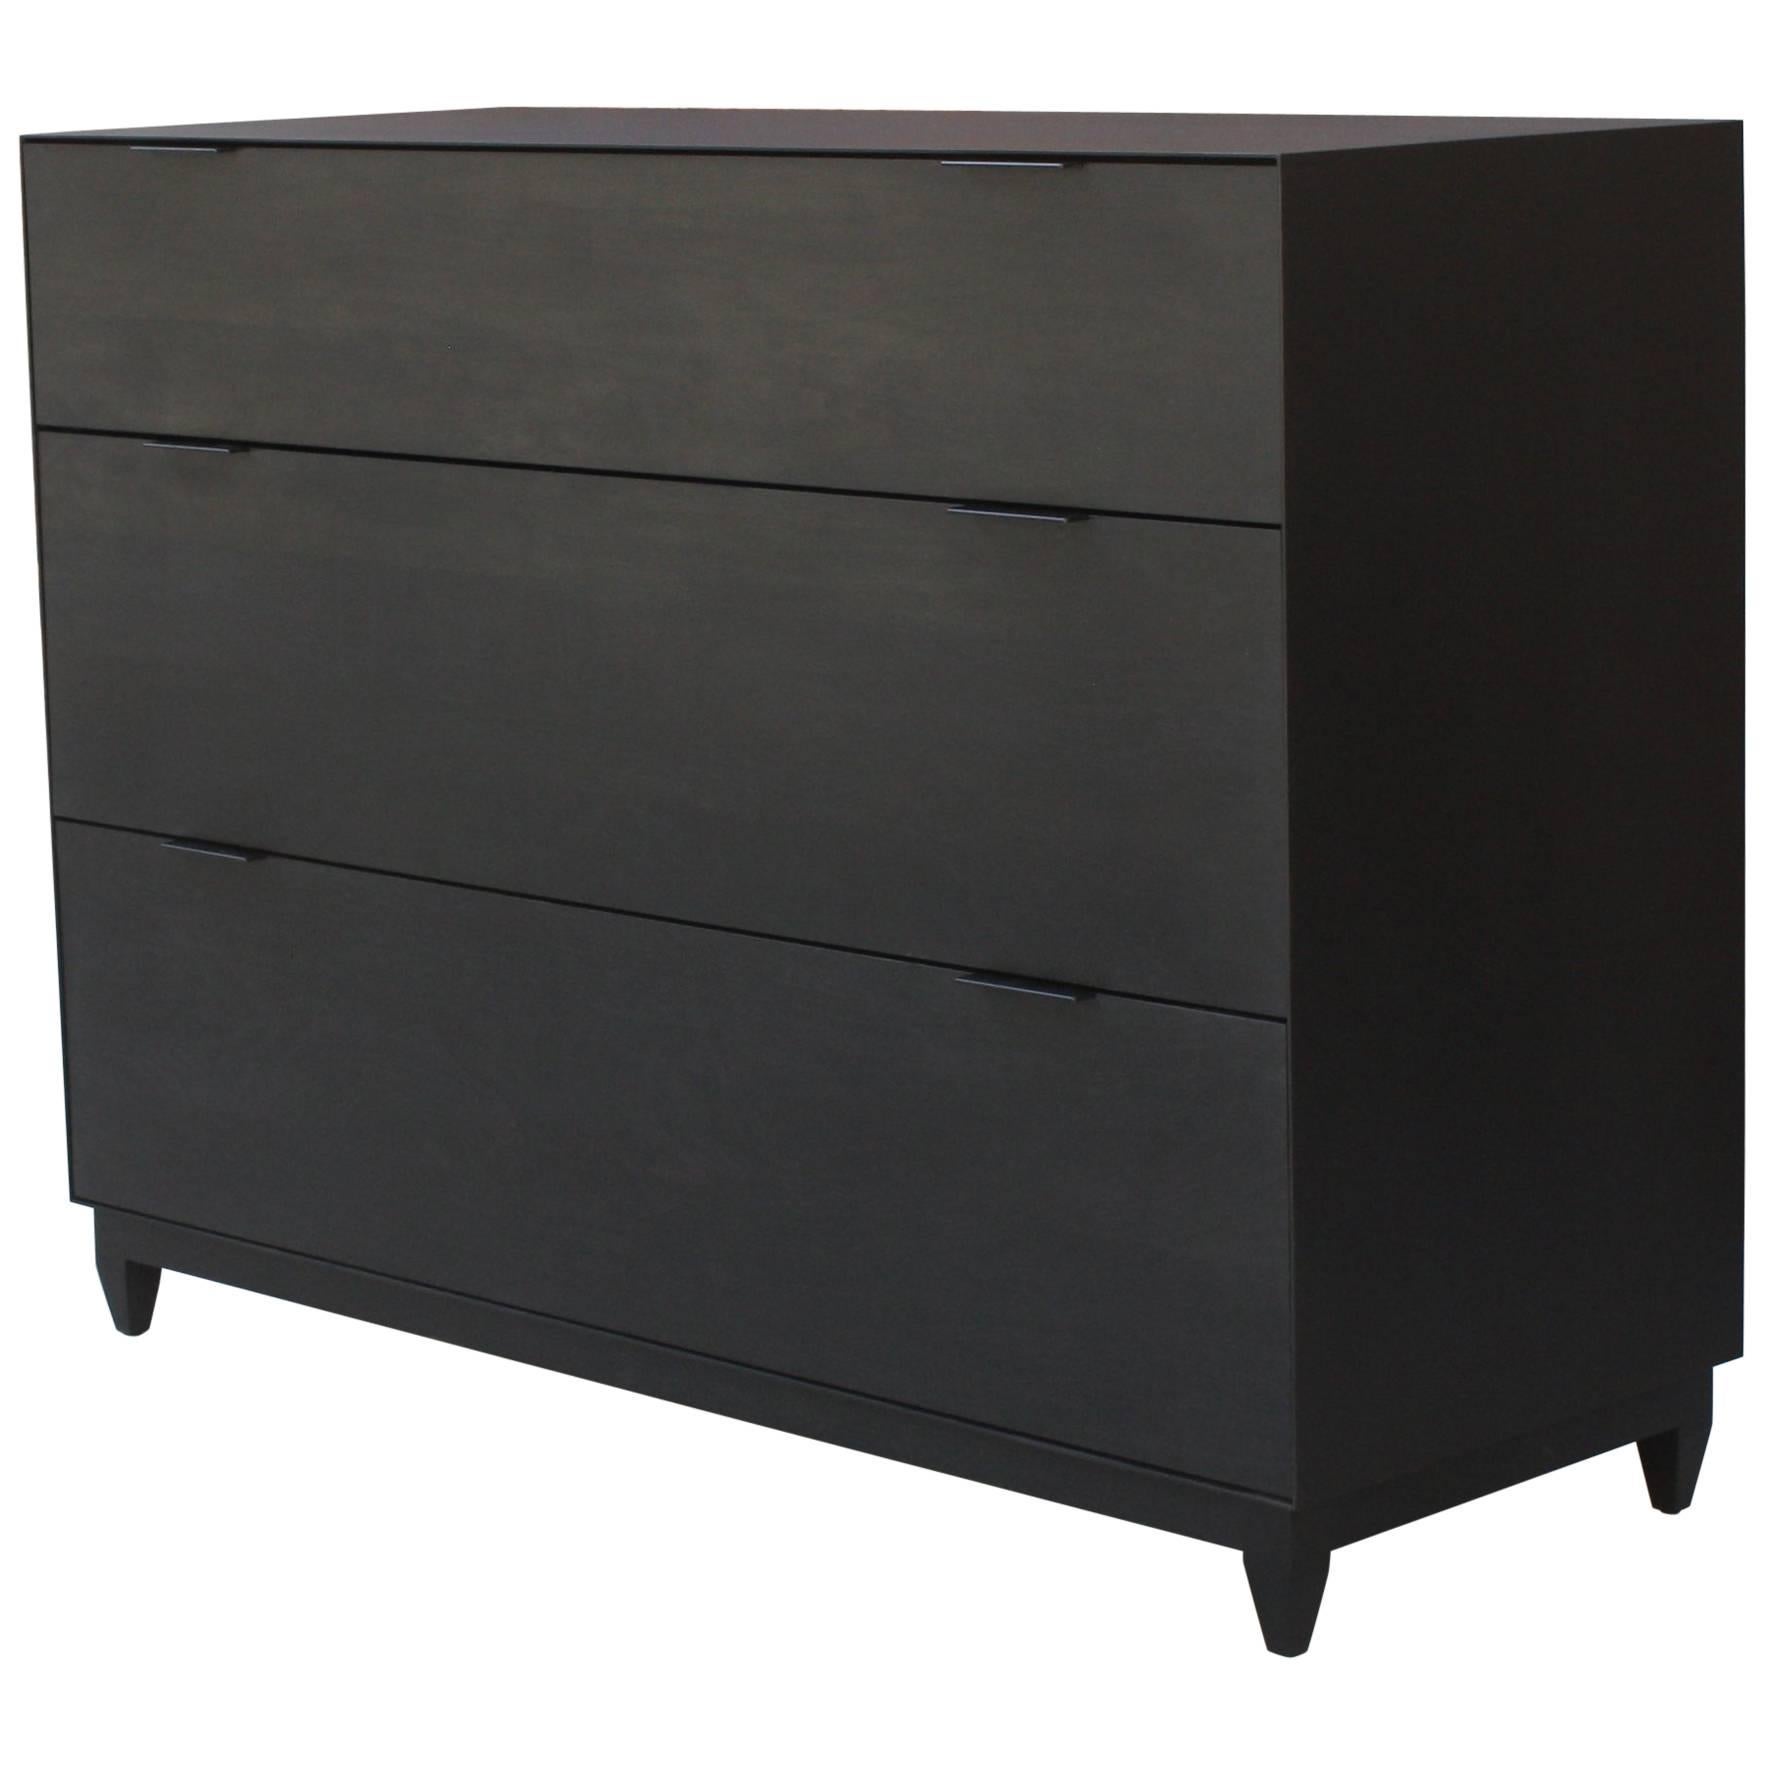 Oxide, Custom Dresser or Handmade Chest of Drawers in Matte Black and Wood For Sale